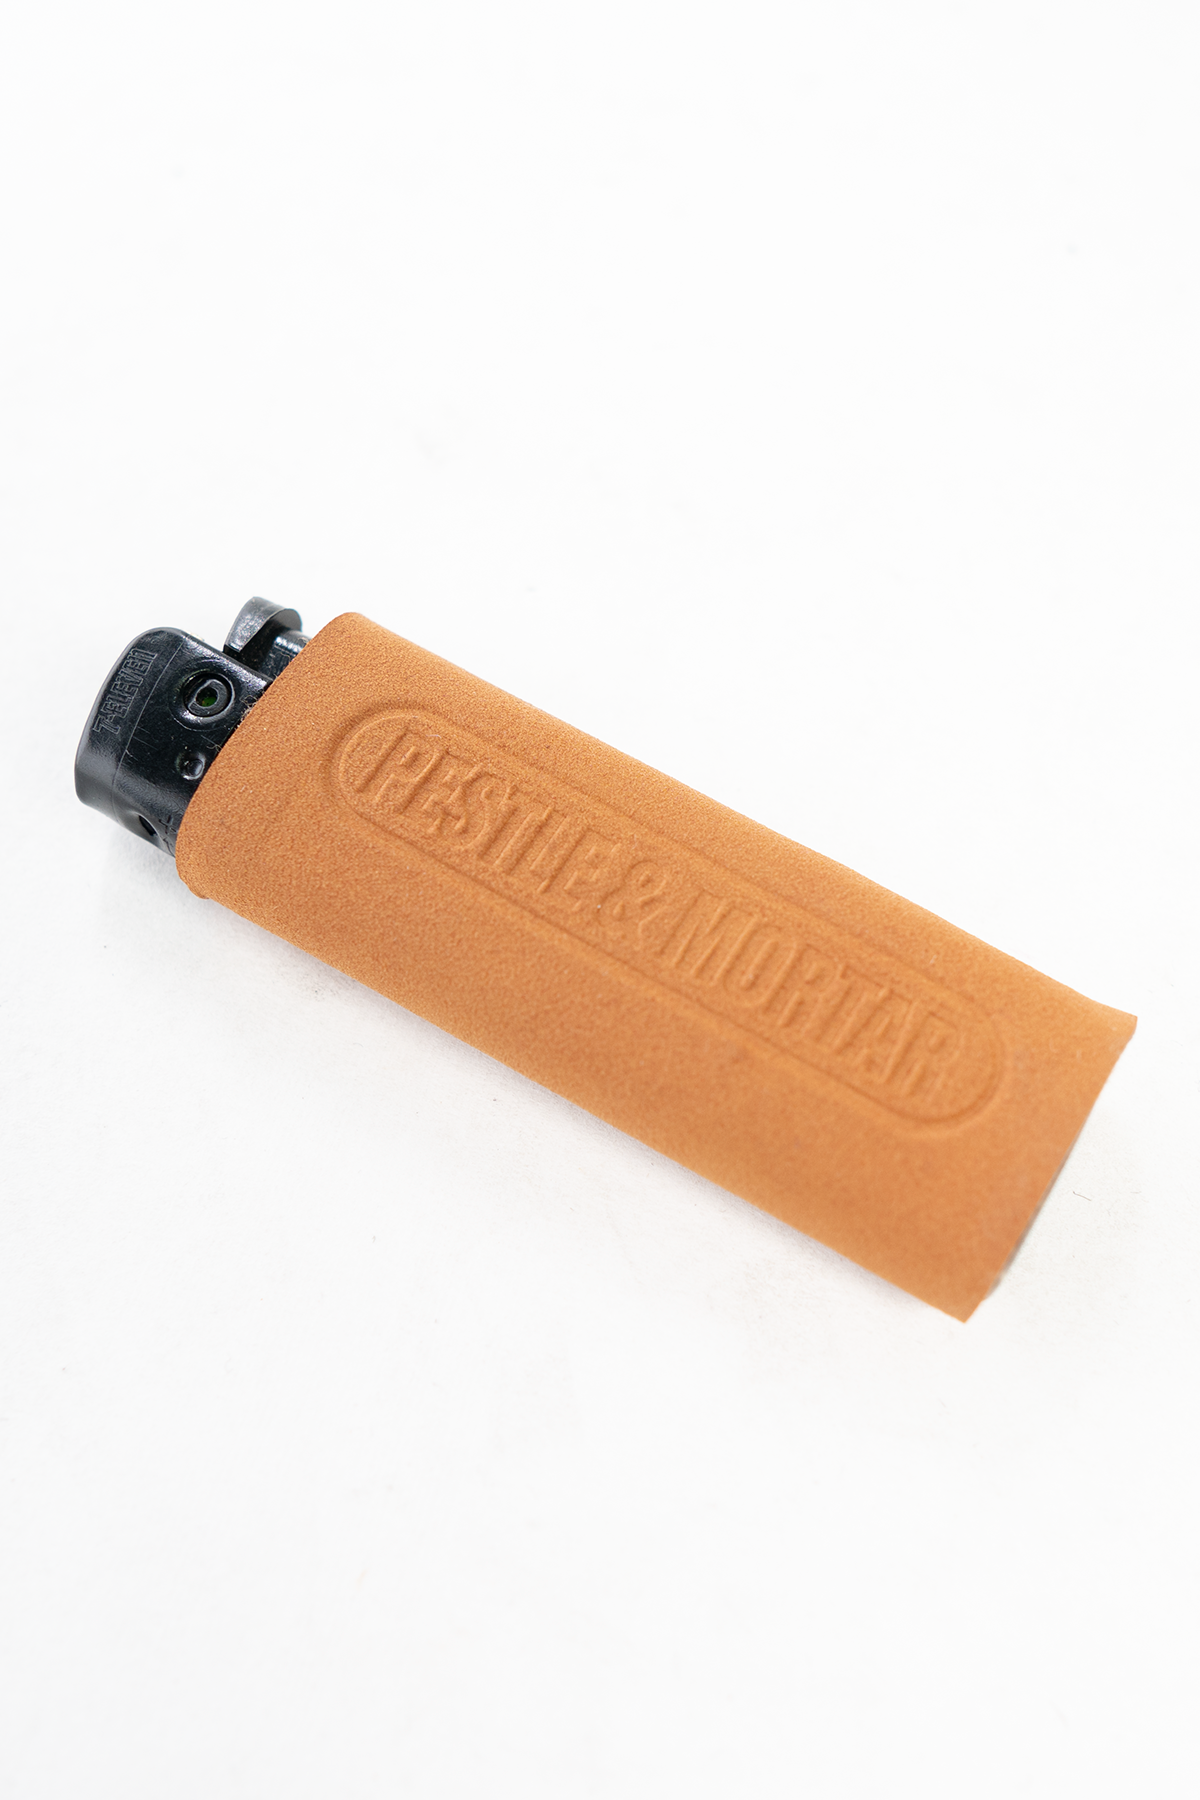 Artbox X PMC Lighter Sleeve Entertainment System Tan (Store)